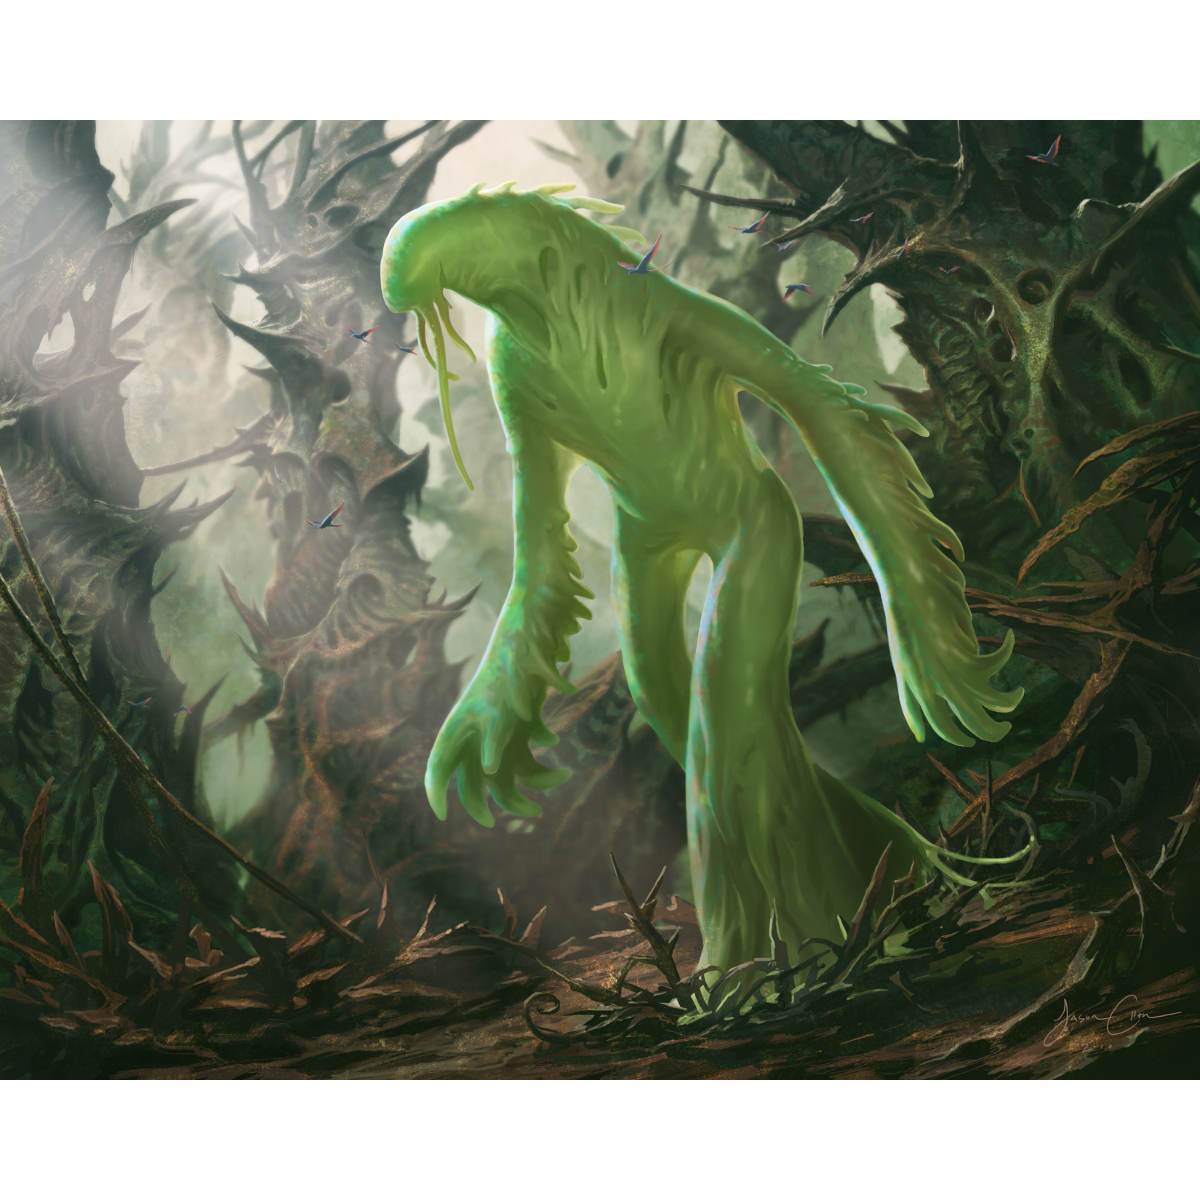 Liege of the Tangle Print - Print - Original Magic Art - Accessories for Magic the Gathering and other card games